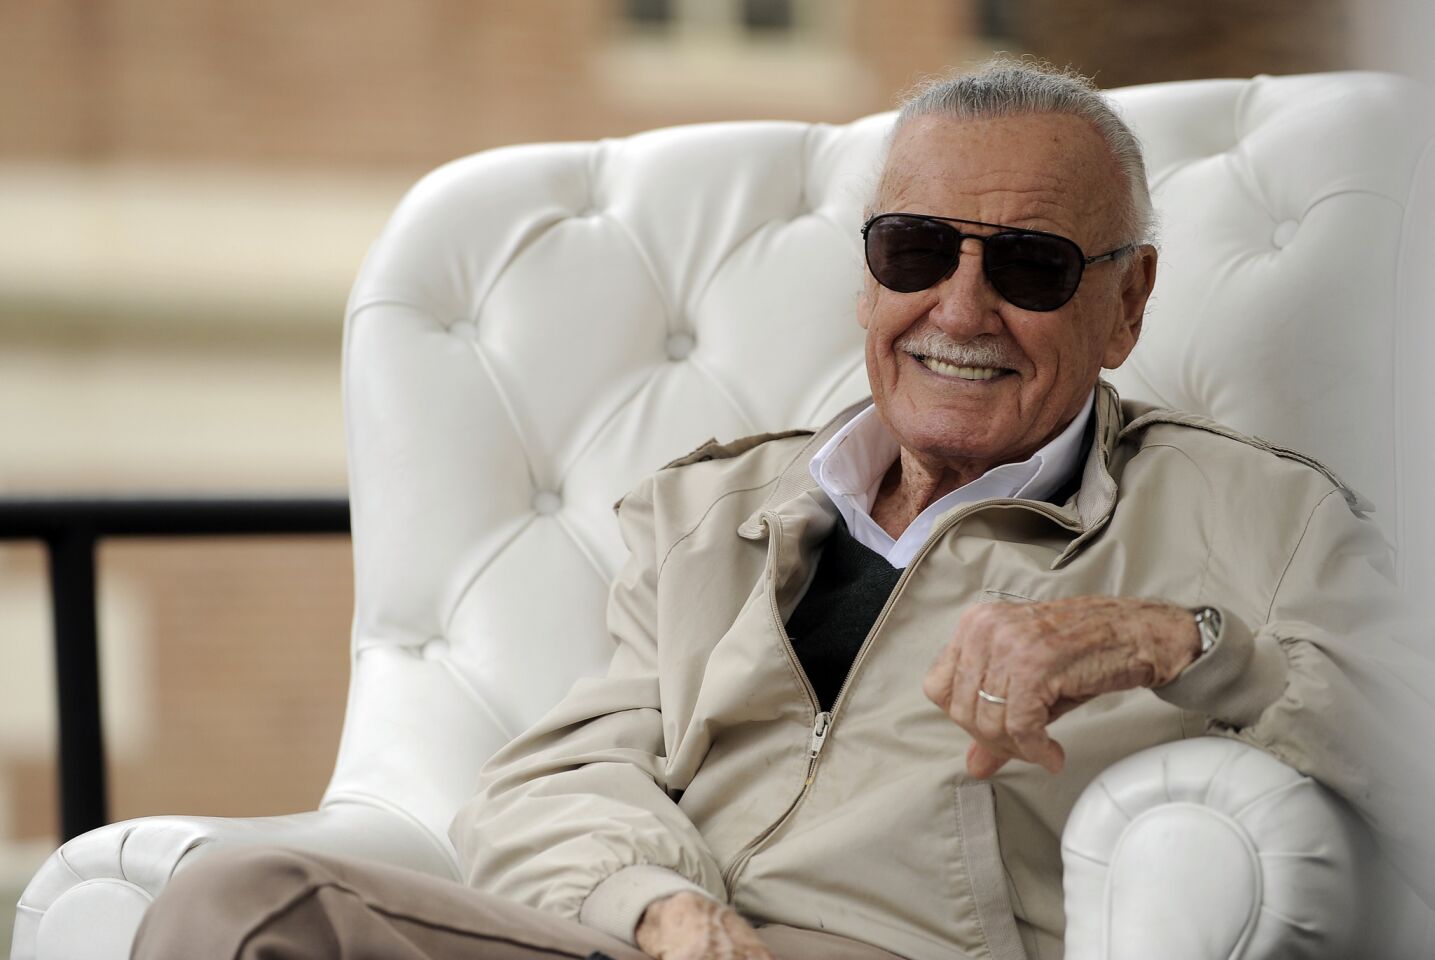 Comic book icon Stan Lee has a relaxed chat during the 2016 Festival of Books in Los Angeles.